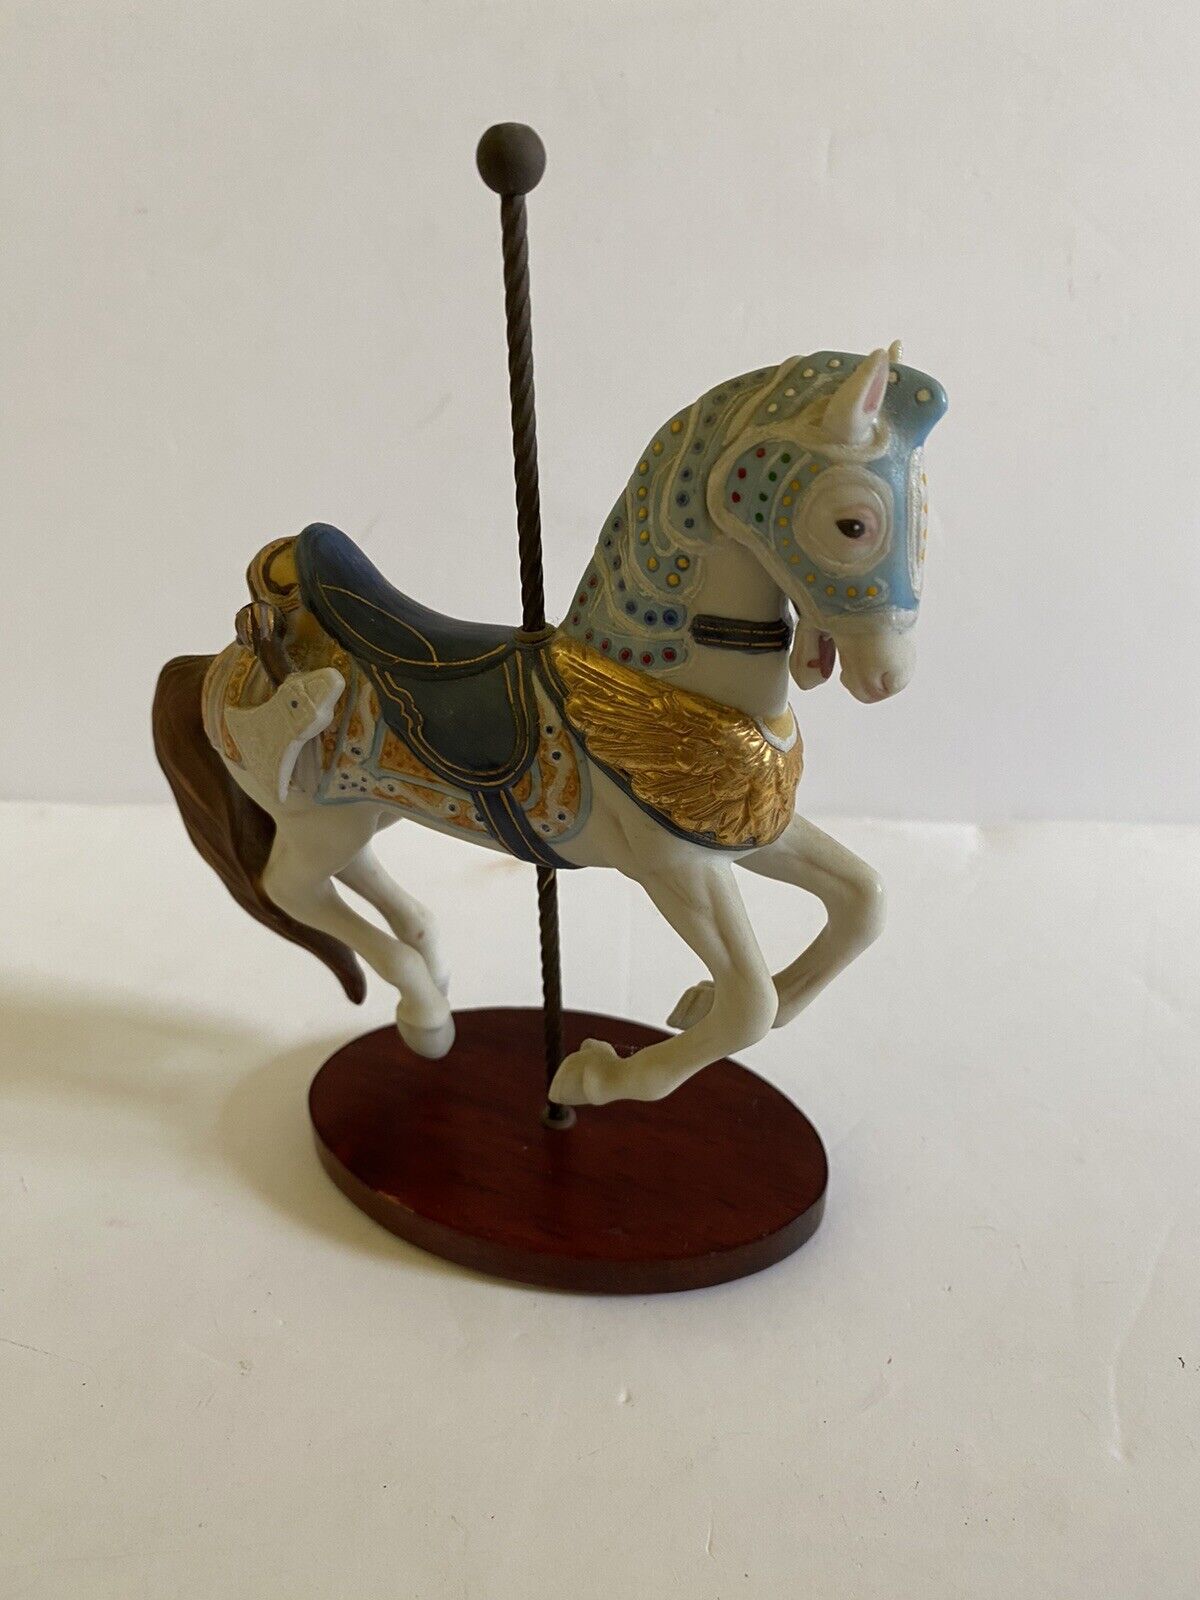 Franklin Mint Carousel Horse, Armored Horse 1988 Ceramic William Manns Wood Base